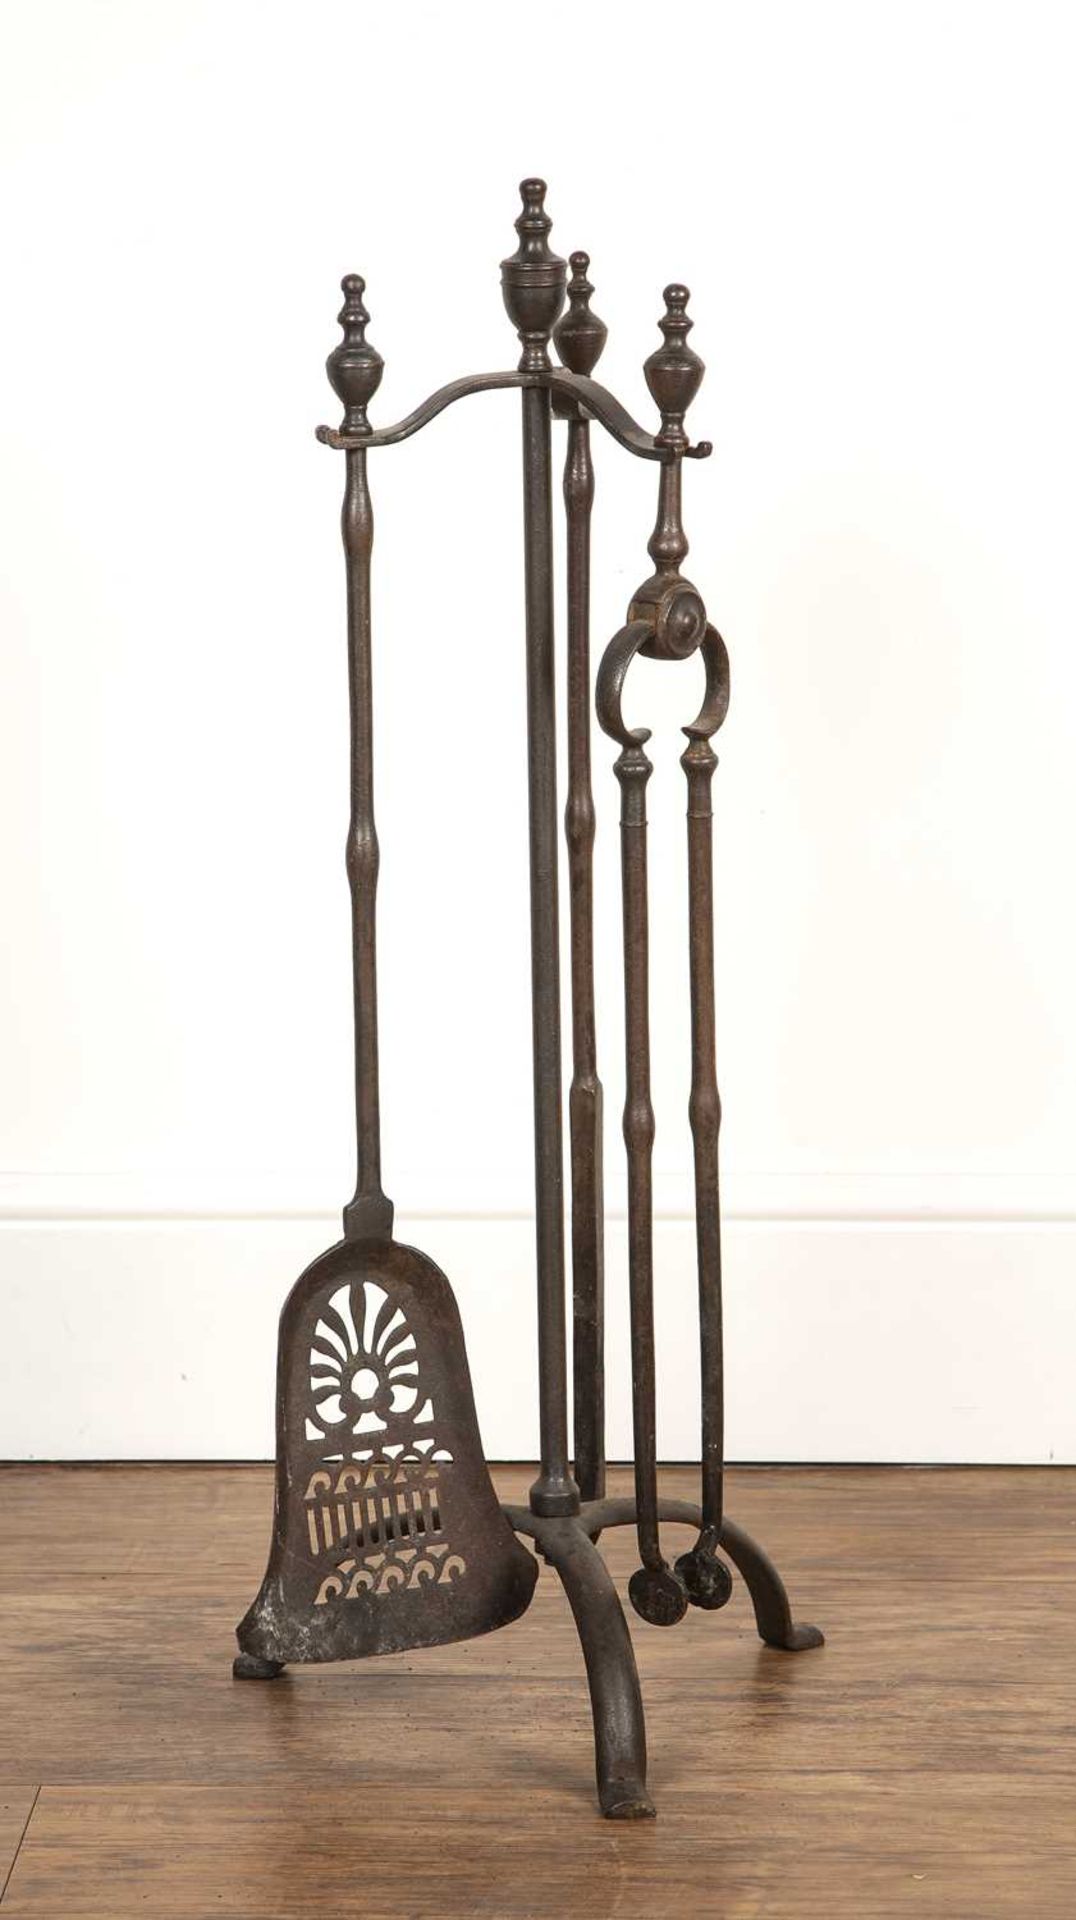 Fireplace companion set 20th Century, iron, the stand on tripod base, 78cm high overall Overall